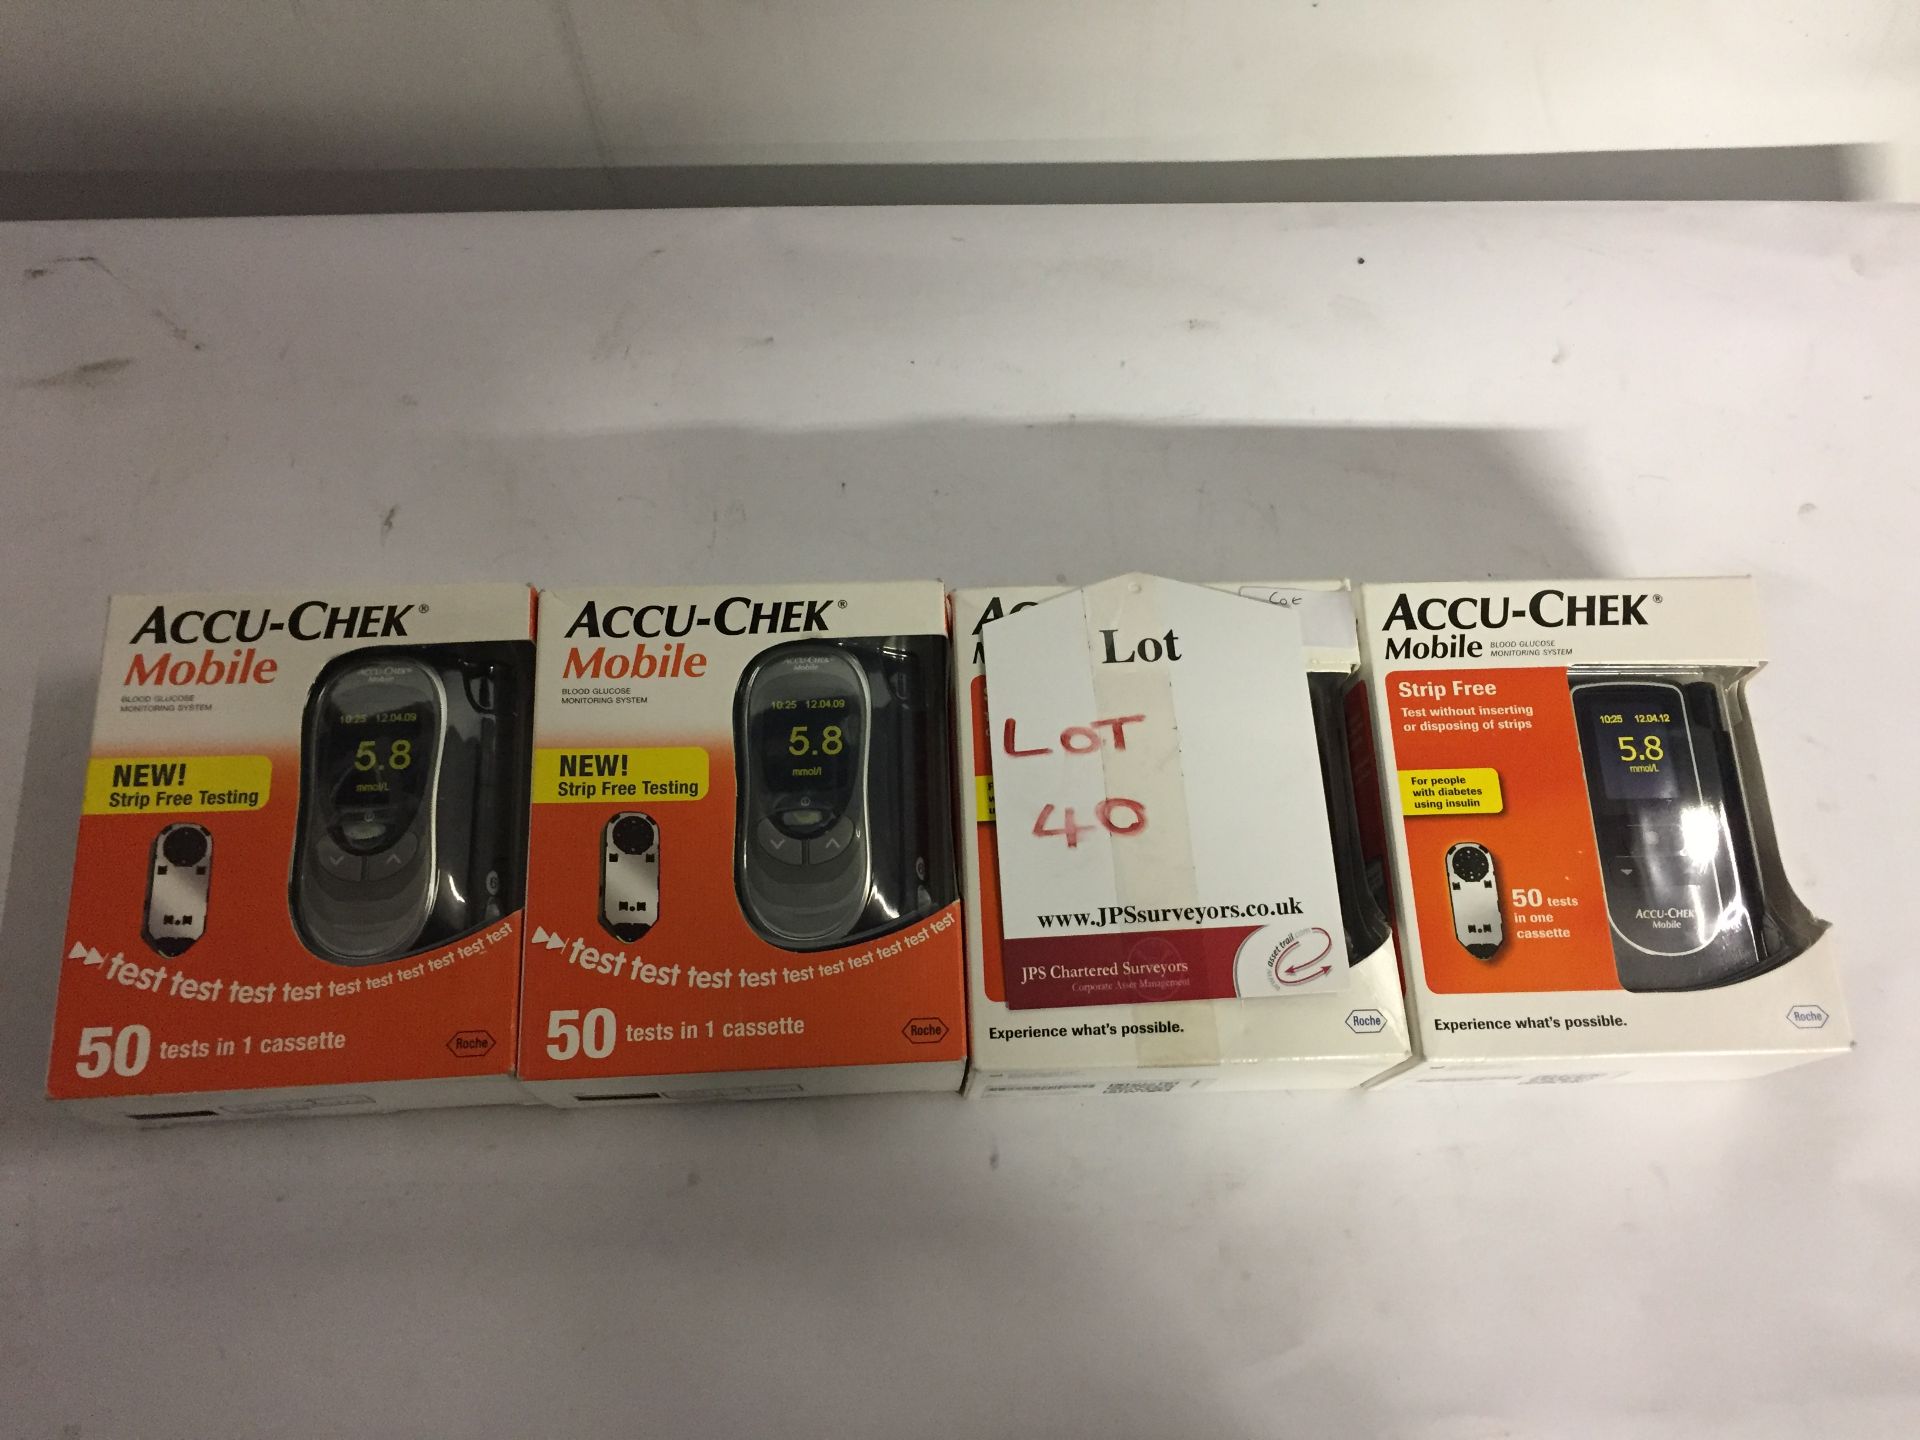 4 x Accu-chek mobile, Blood glucose monitoring syste